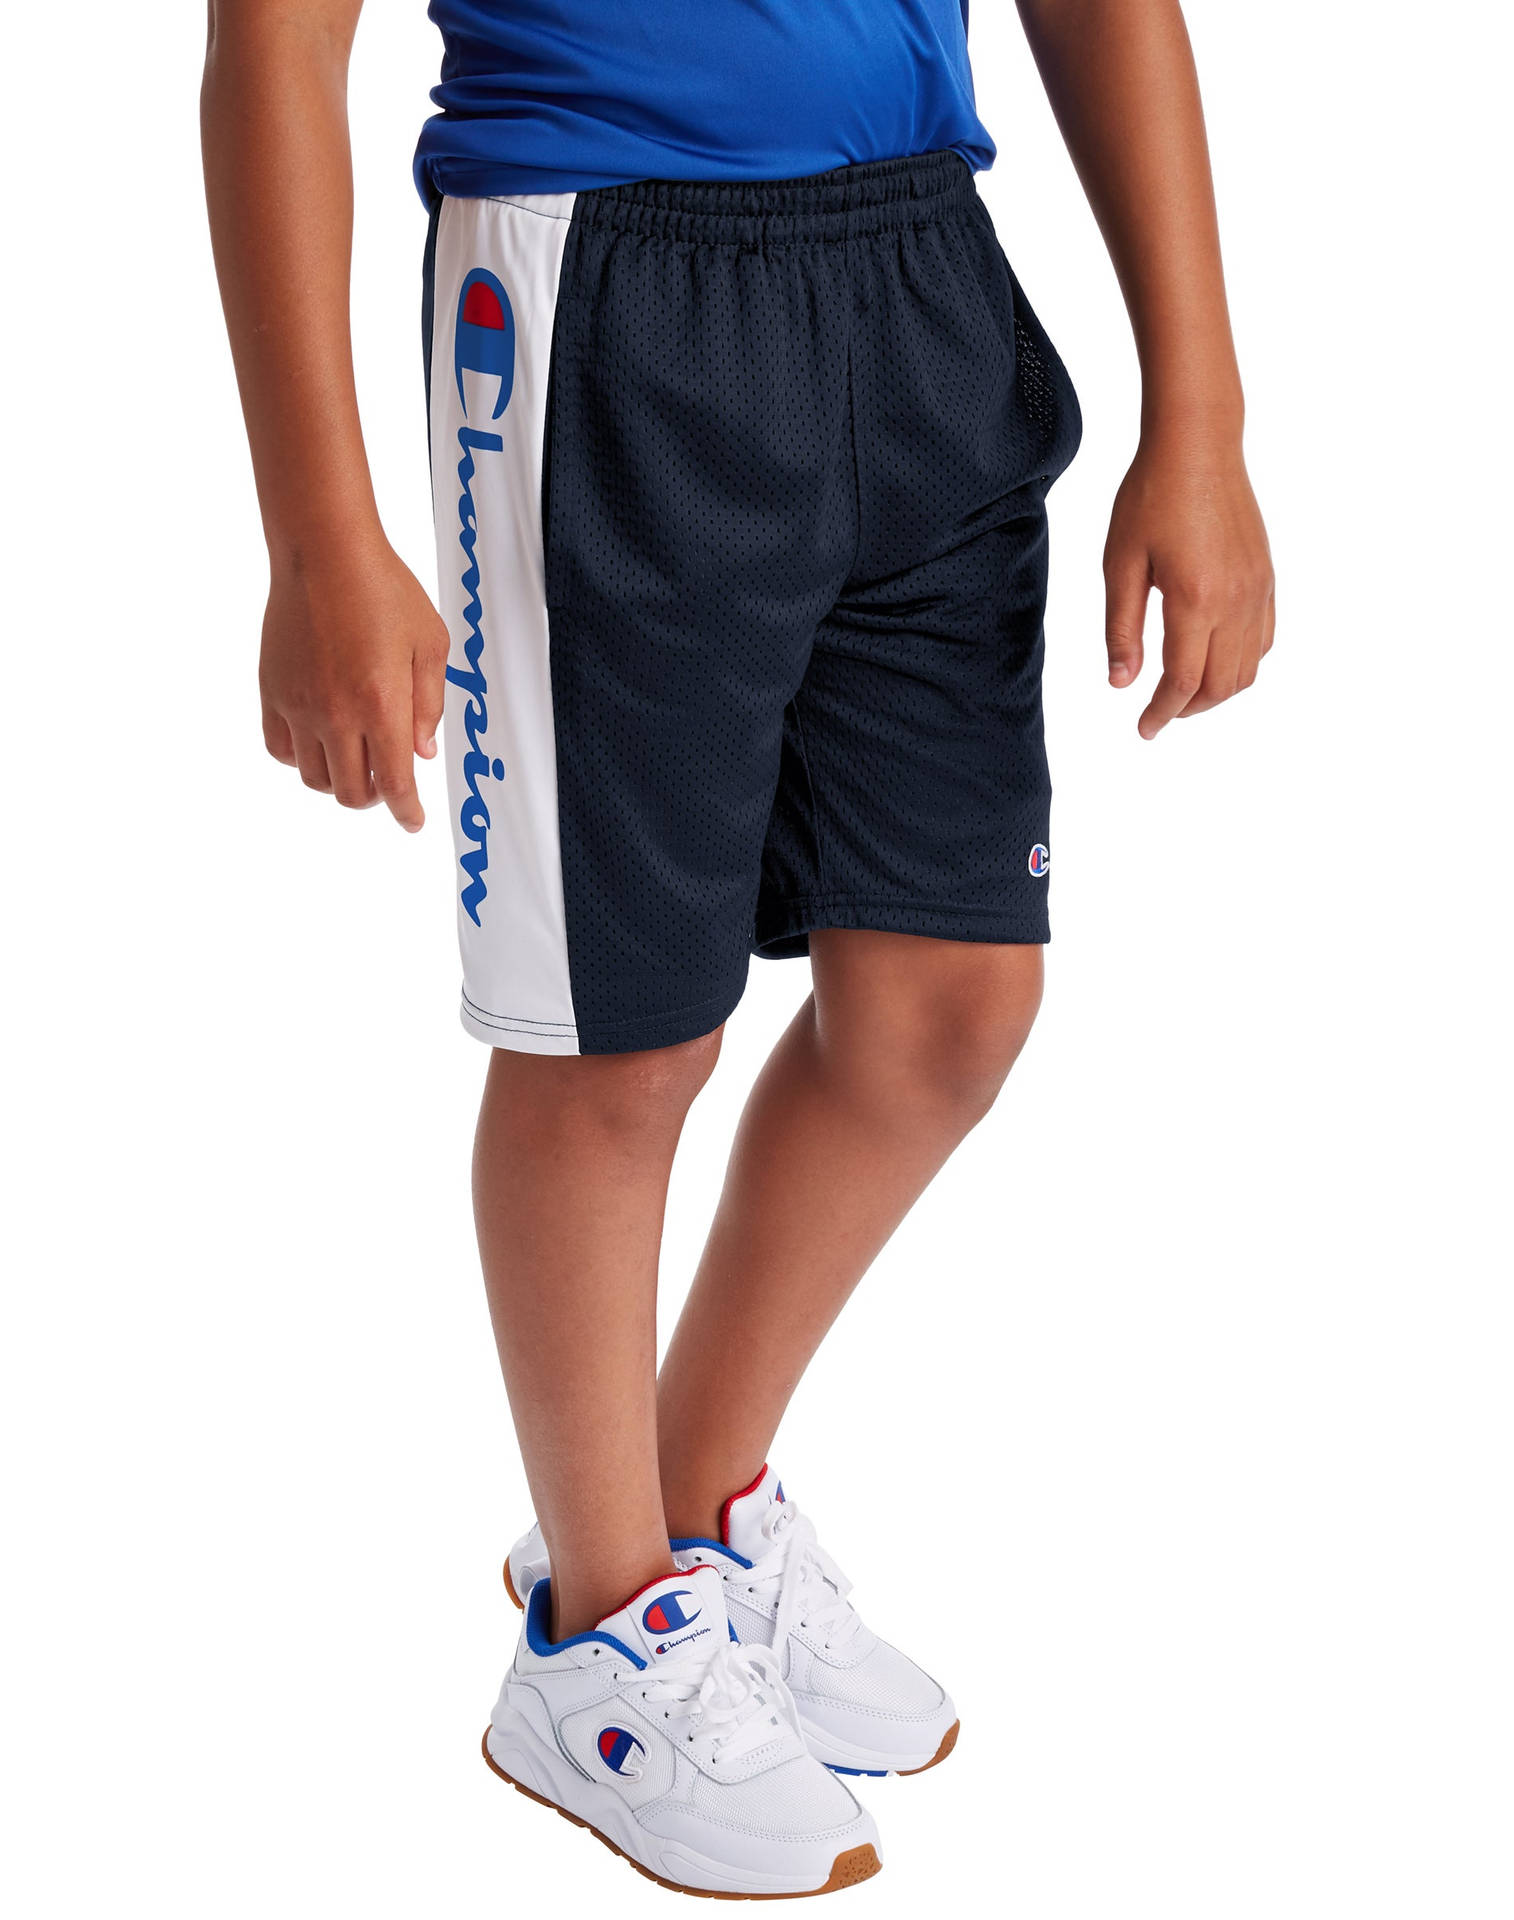 Champion Shorts And Rubber Shoes Background